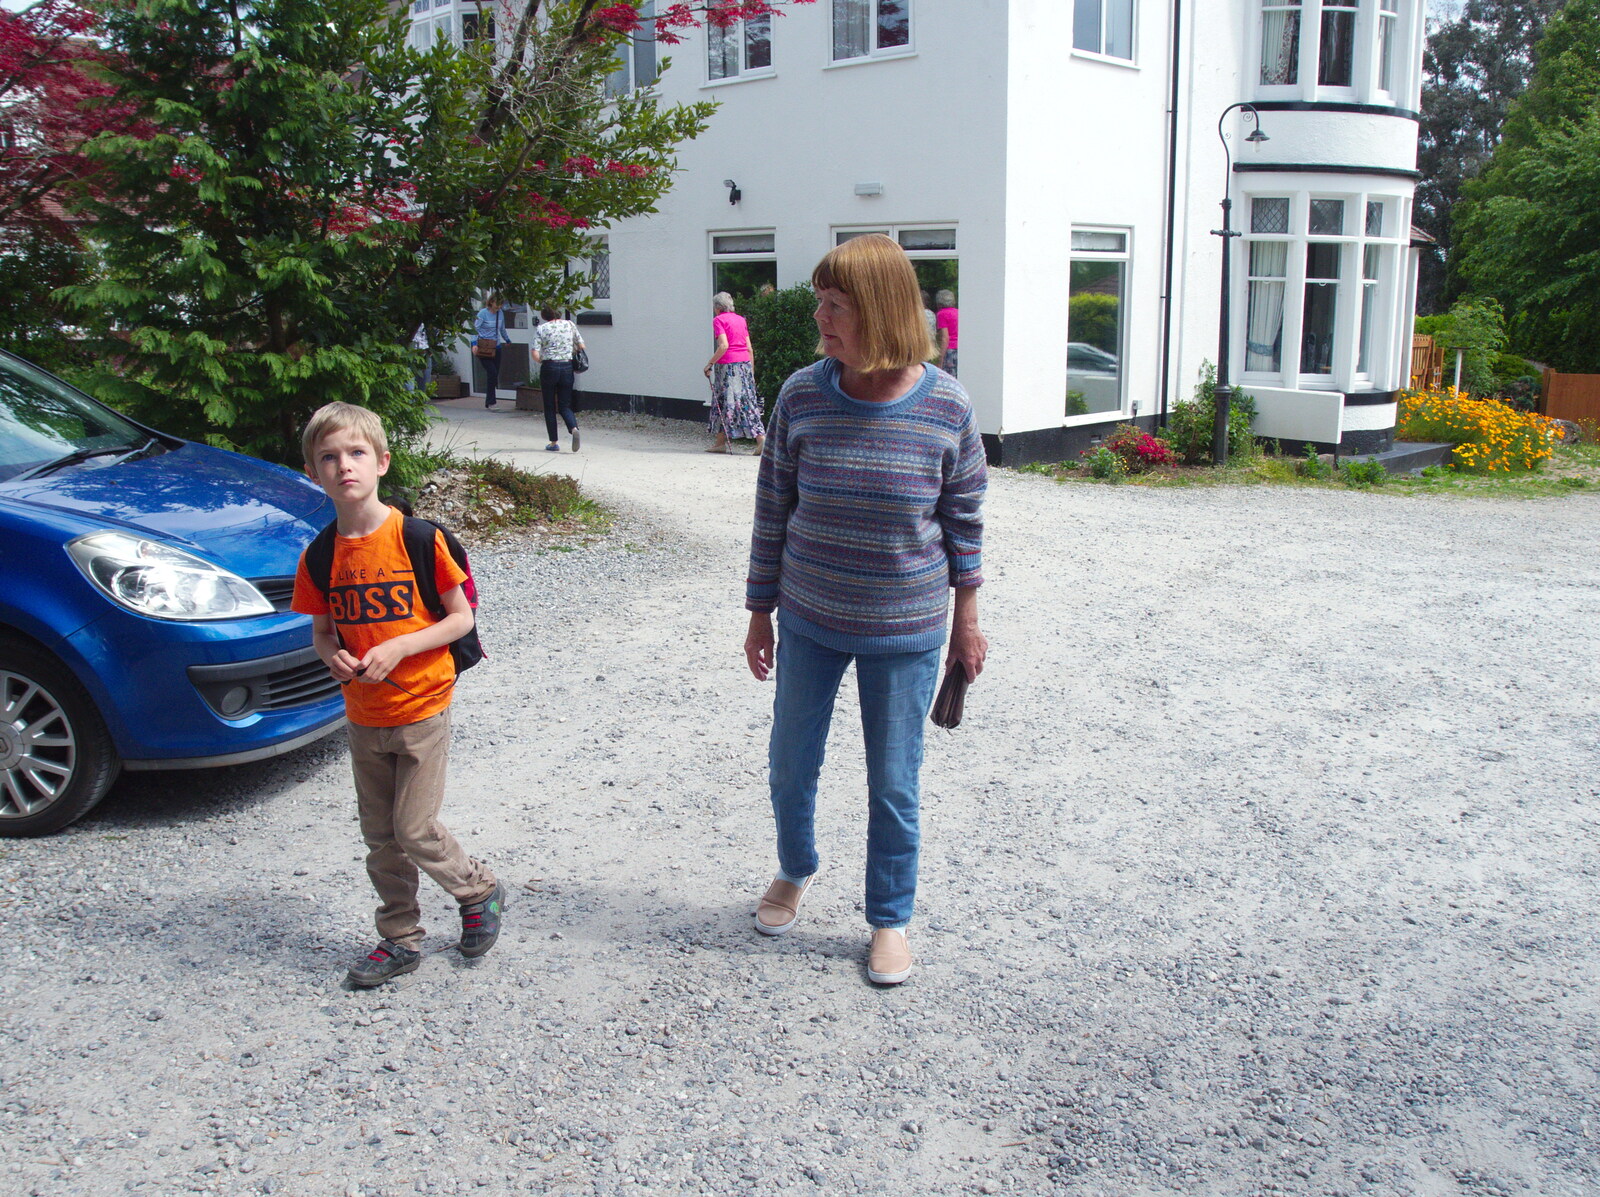 Harry with Grandma J from Chagford Lido and a Trip to Parke, Bovey Tracey, Devon - 25th May 2019